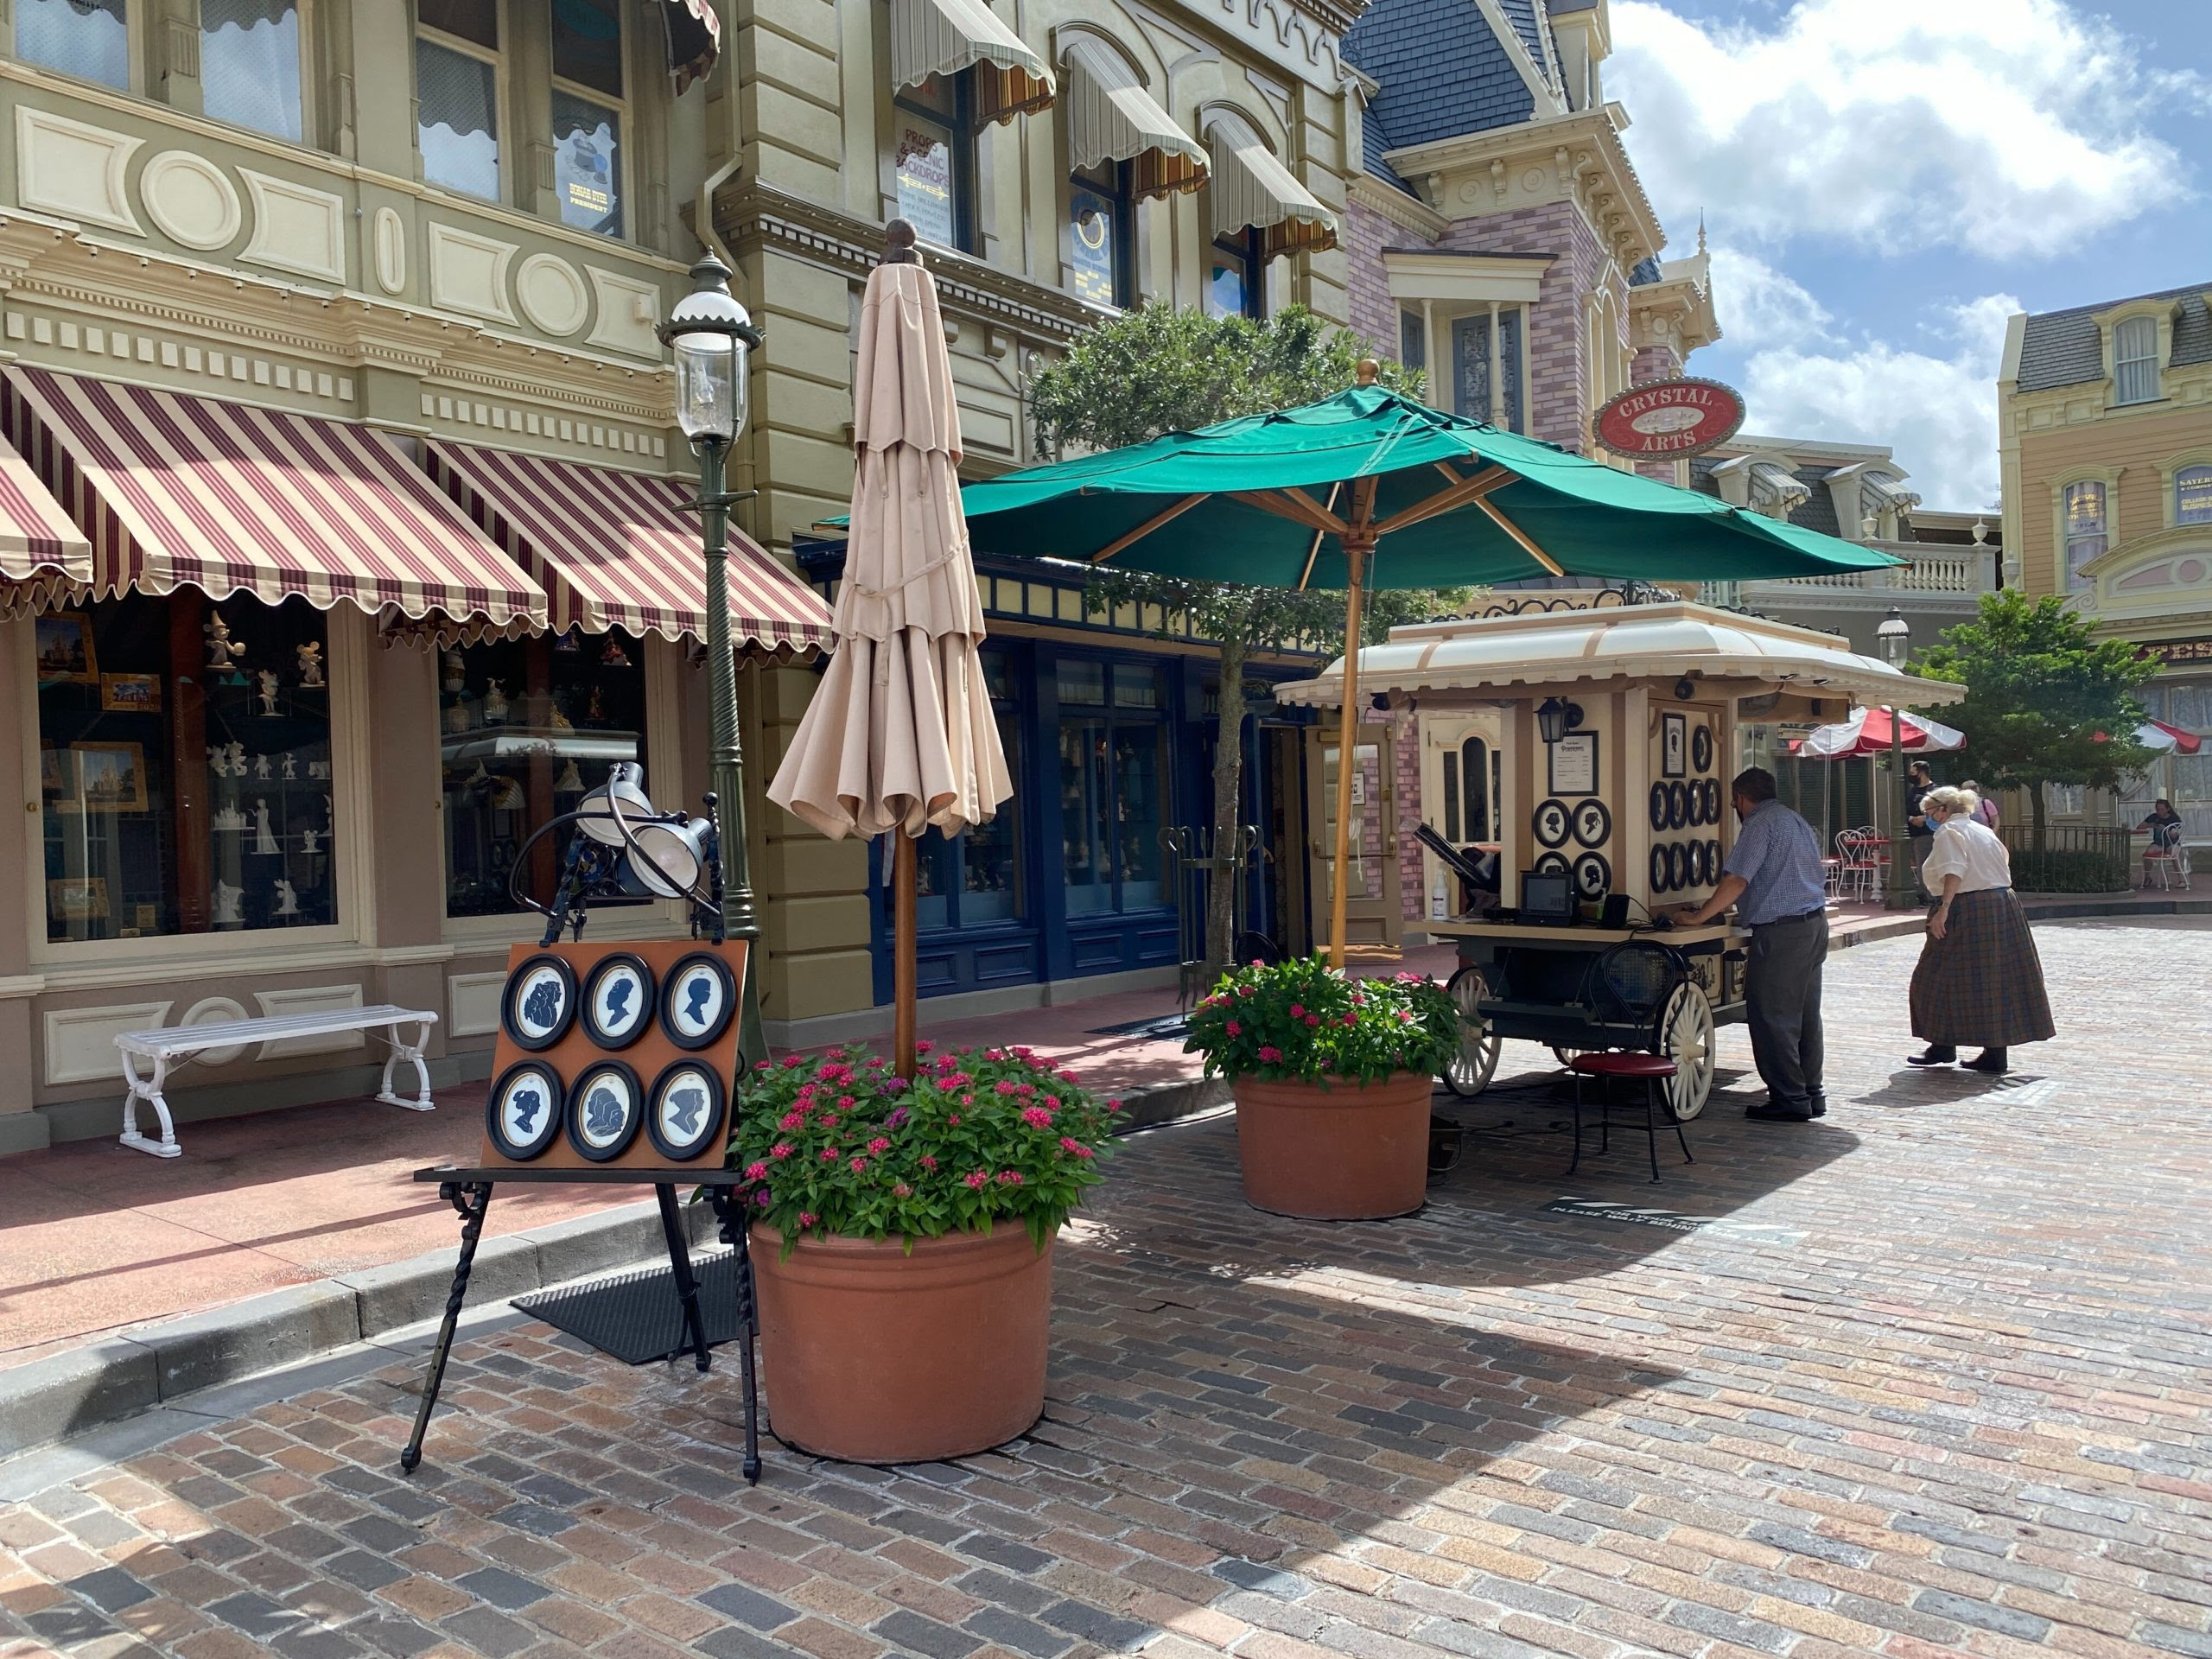 Pavement Replacement Project Starts Next Week on Center Street at Magic Kingdom